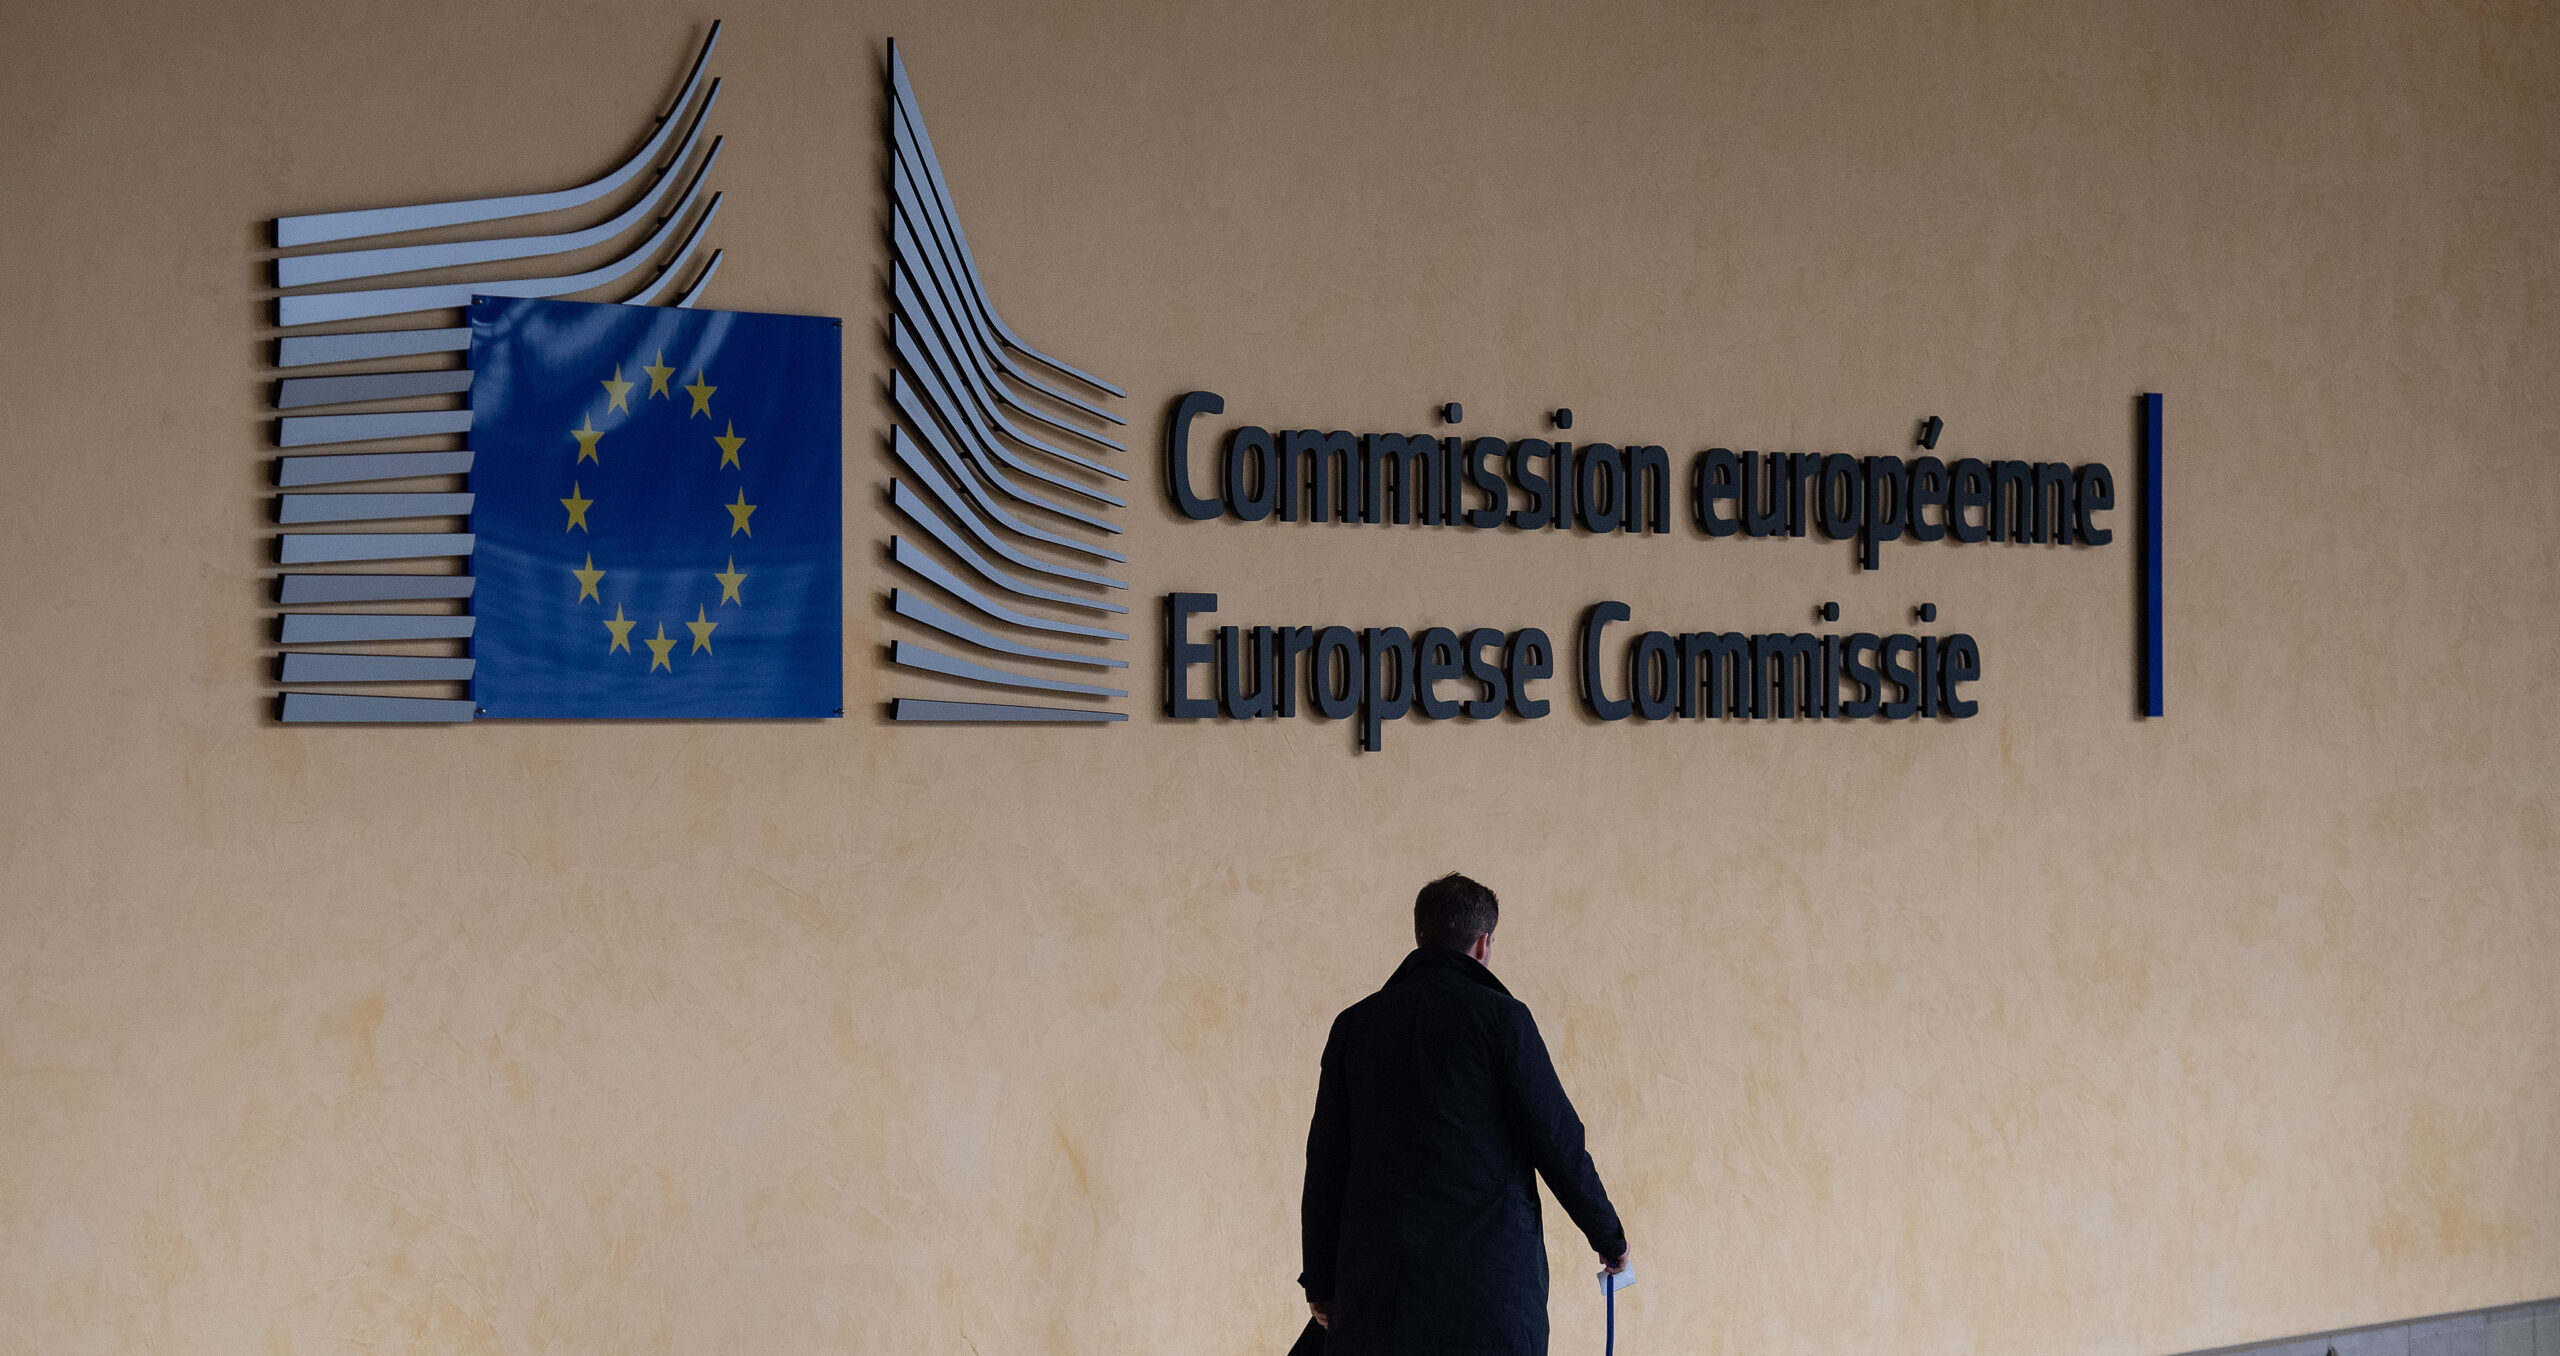 The European Commission has expressed a desire to support transition finance. (Photo: Leon Neal/Getty Images) 